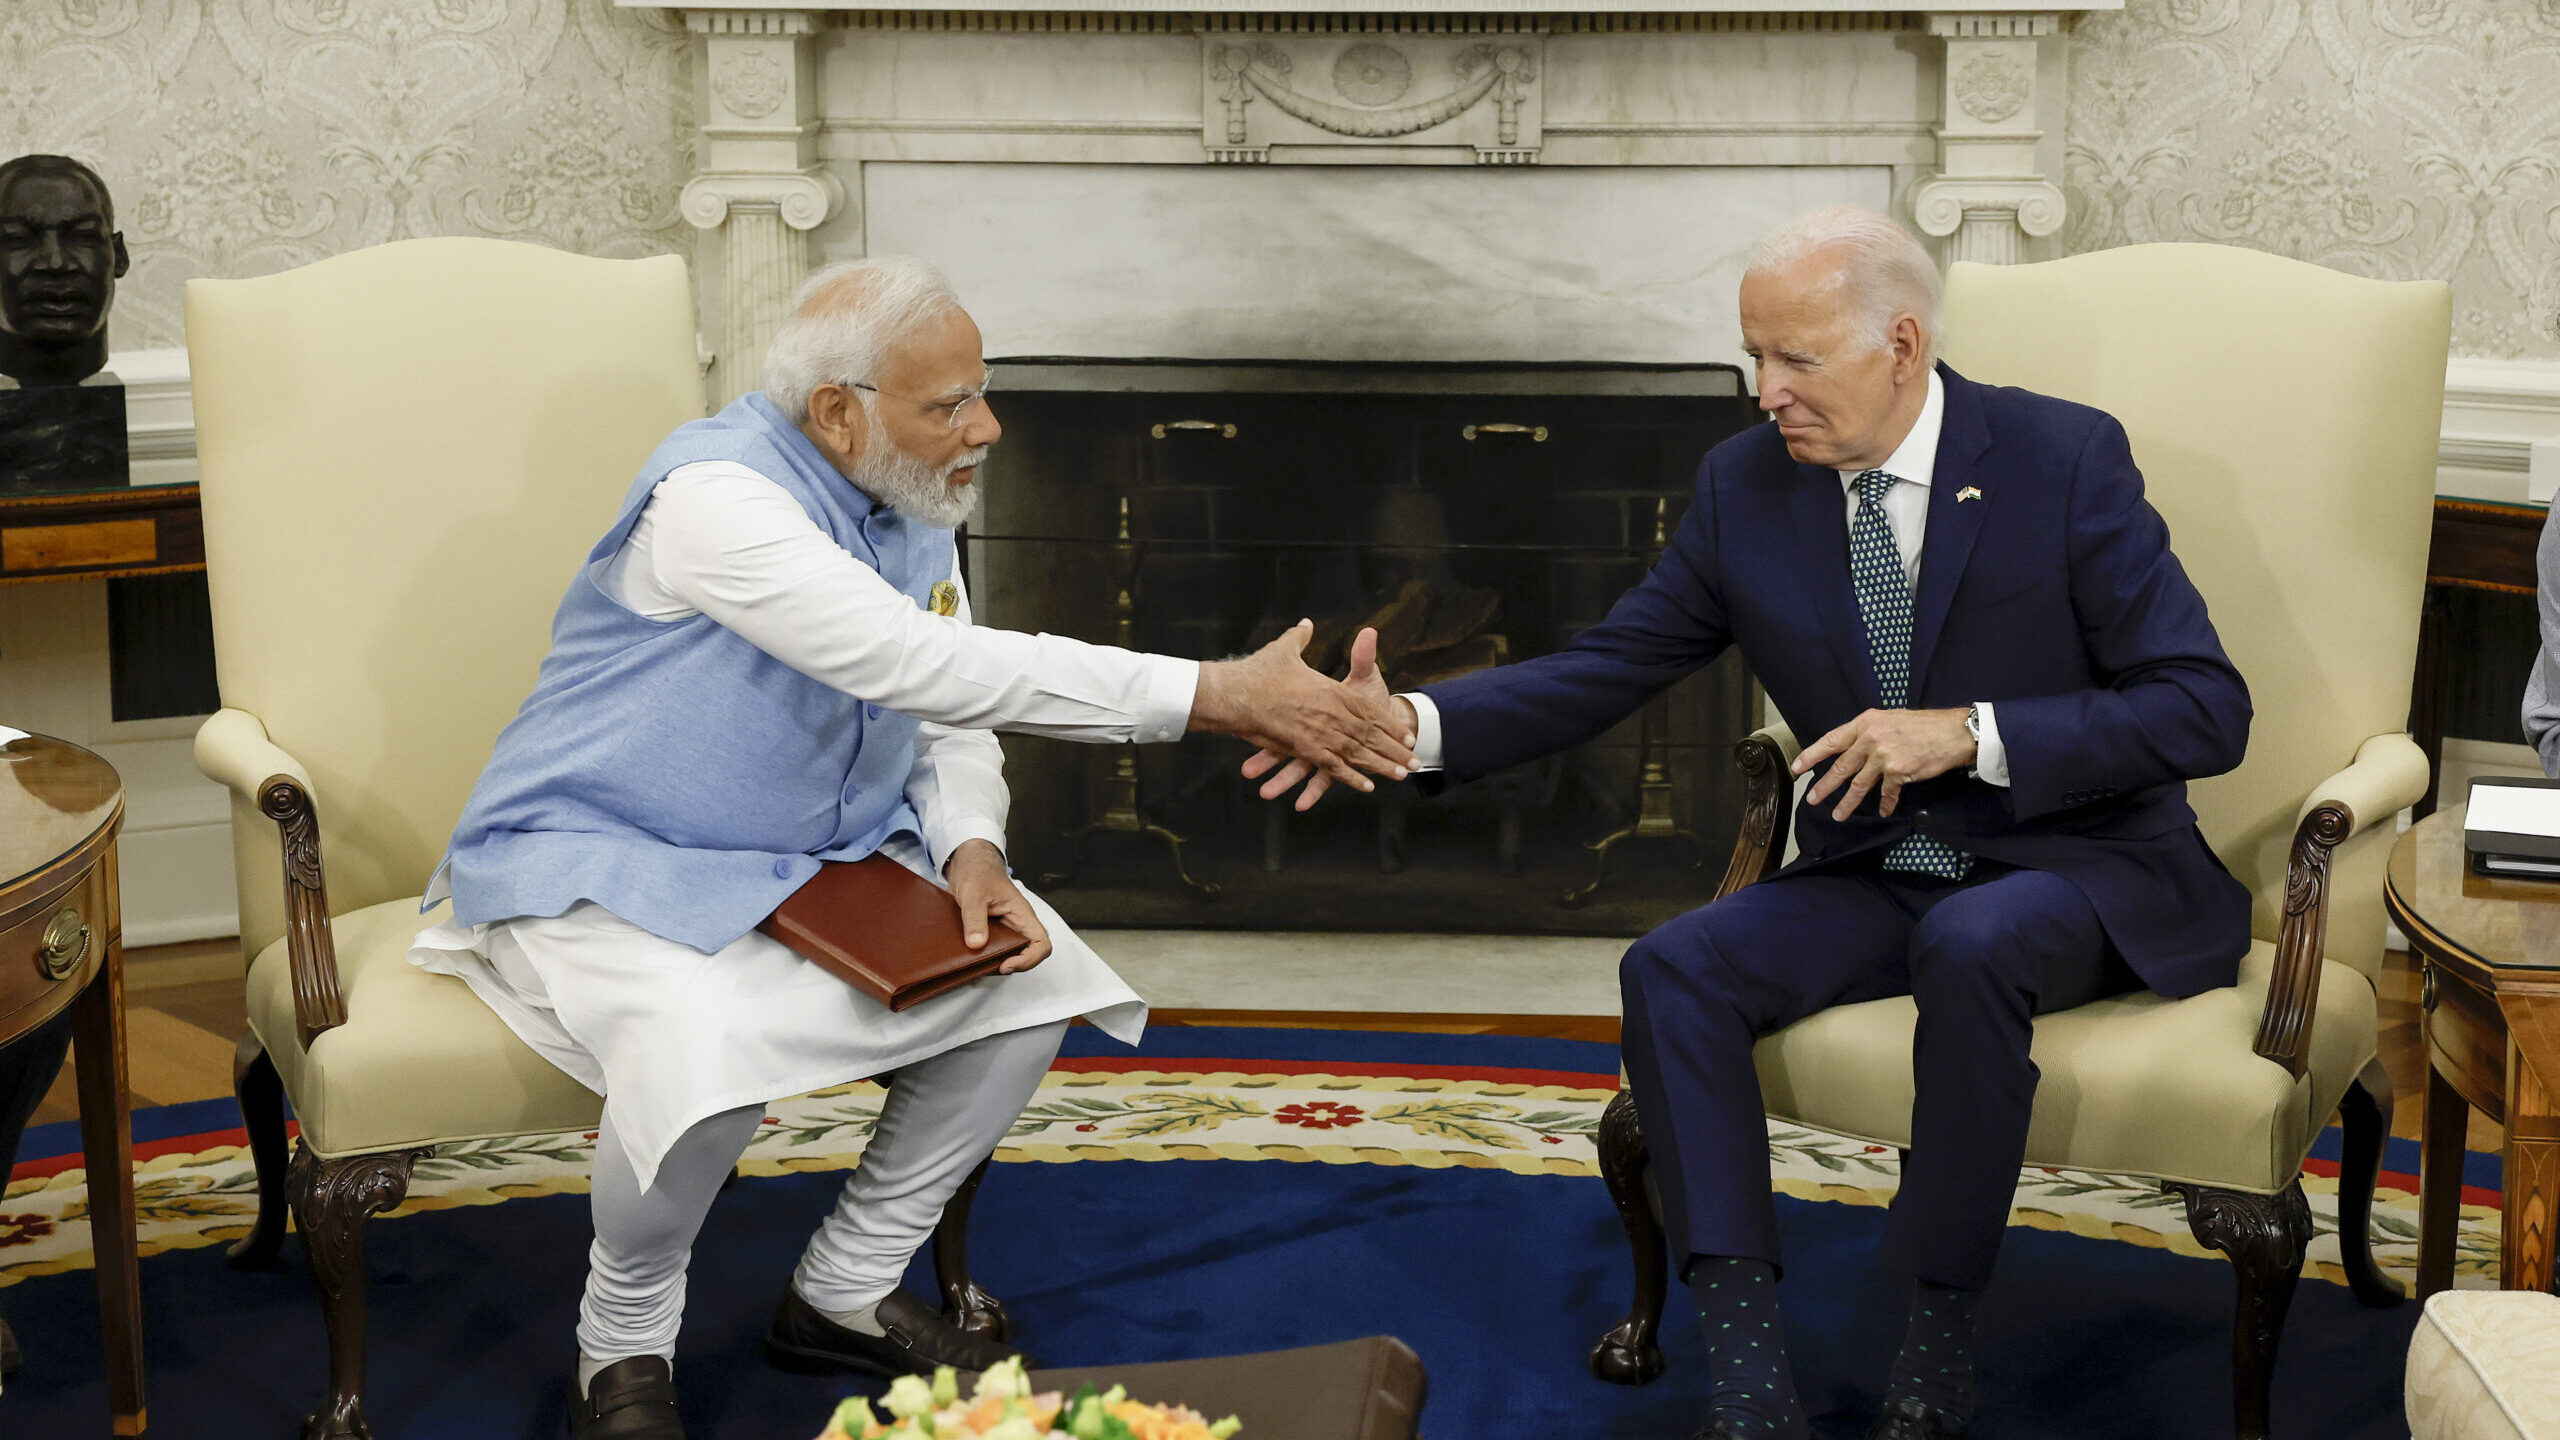 Official State Visit Of Indian Prime Minister Modi To The U.S.